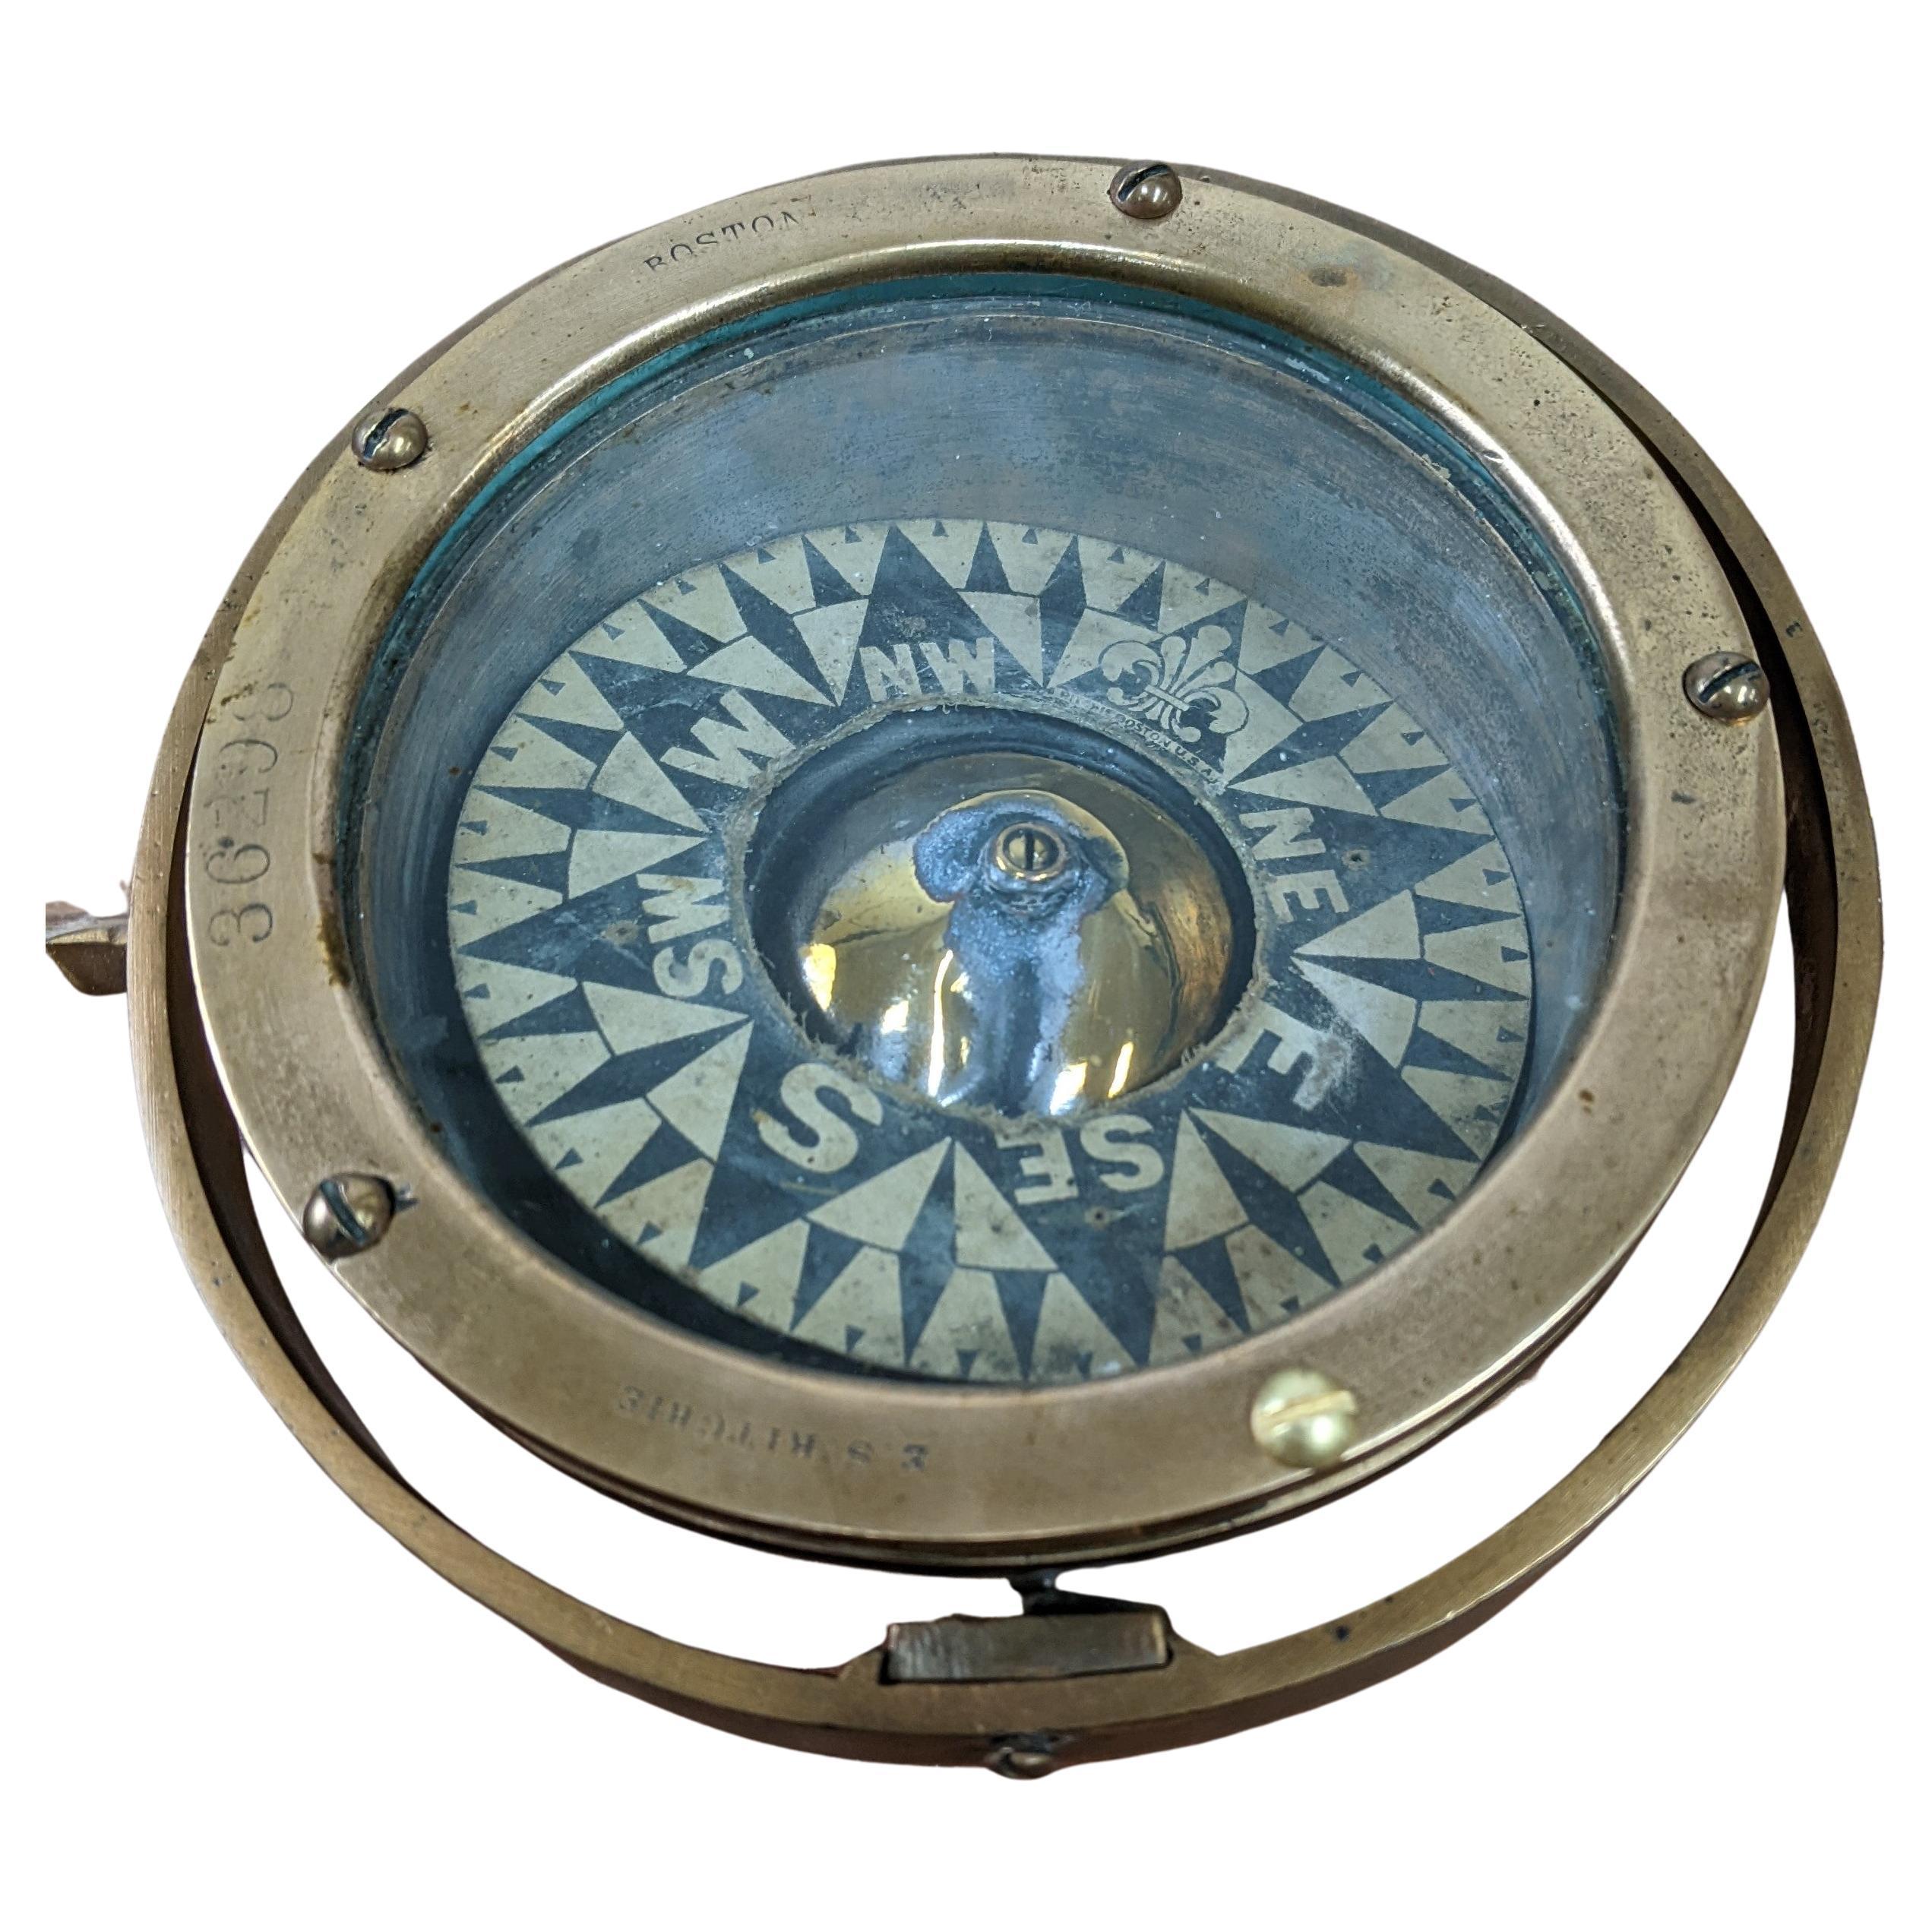 Introducing the Antique E.S. Ritchie Brass Compass from the early 1900s to 1920s. This piece of history has been accurately dated by examining its serial number and comparing it to other Ritchie compasses found on trustworthy sites. Our research has